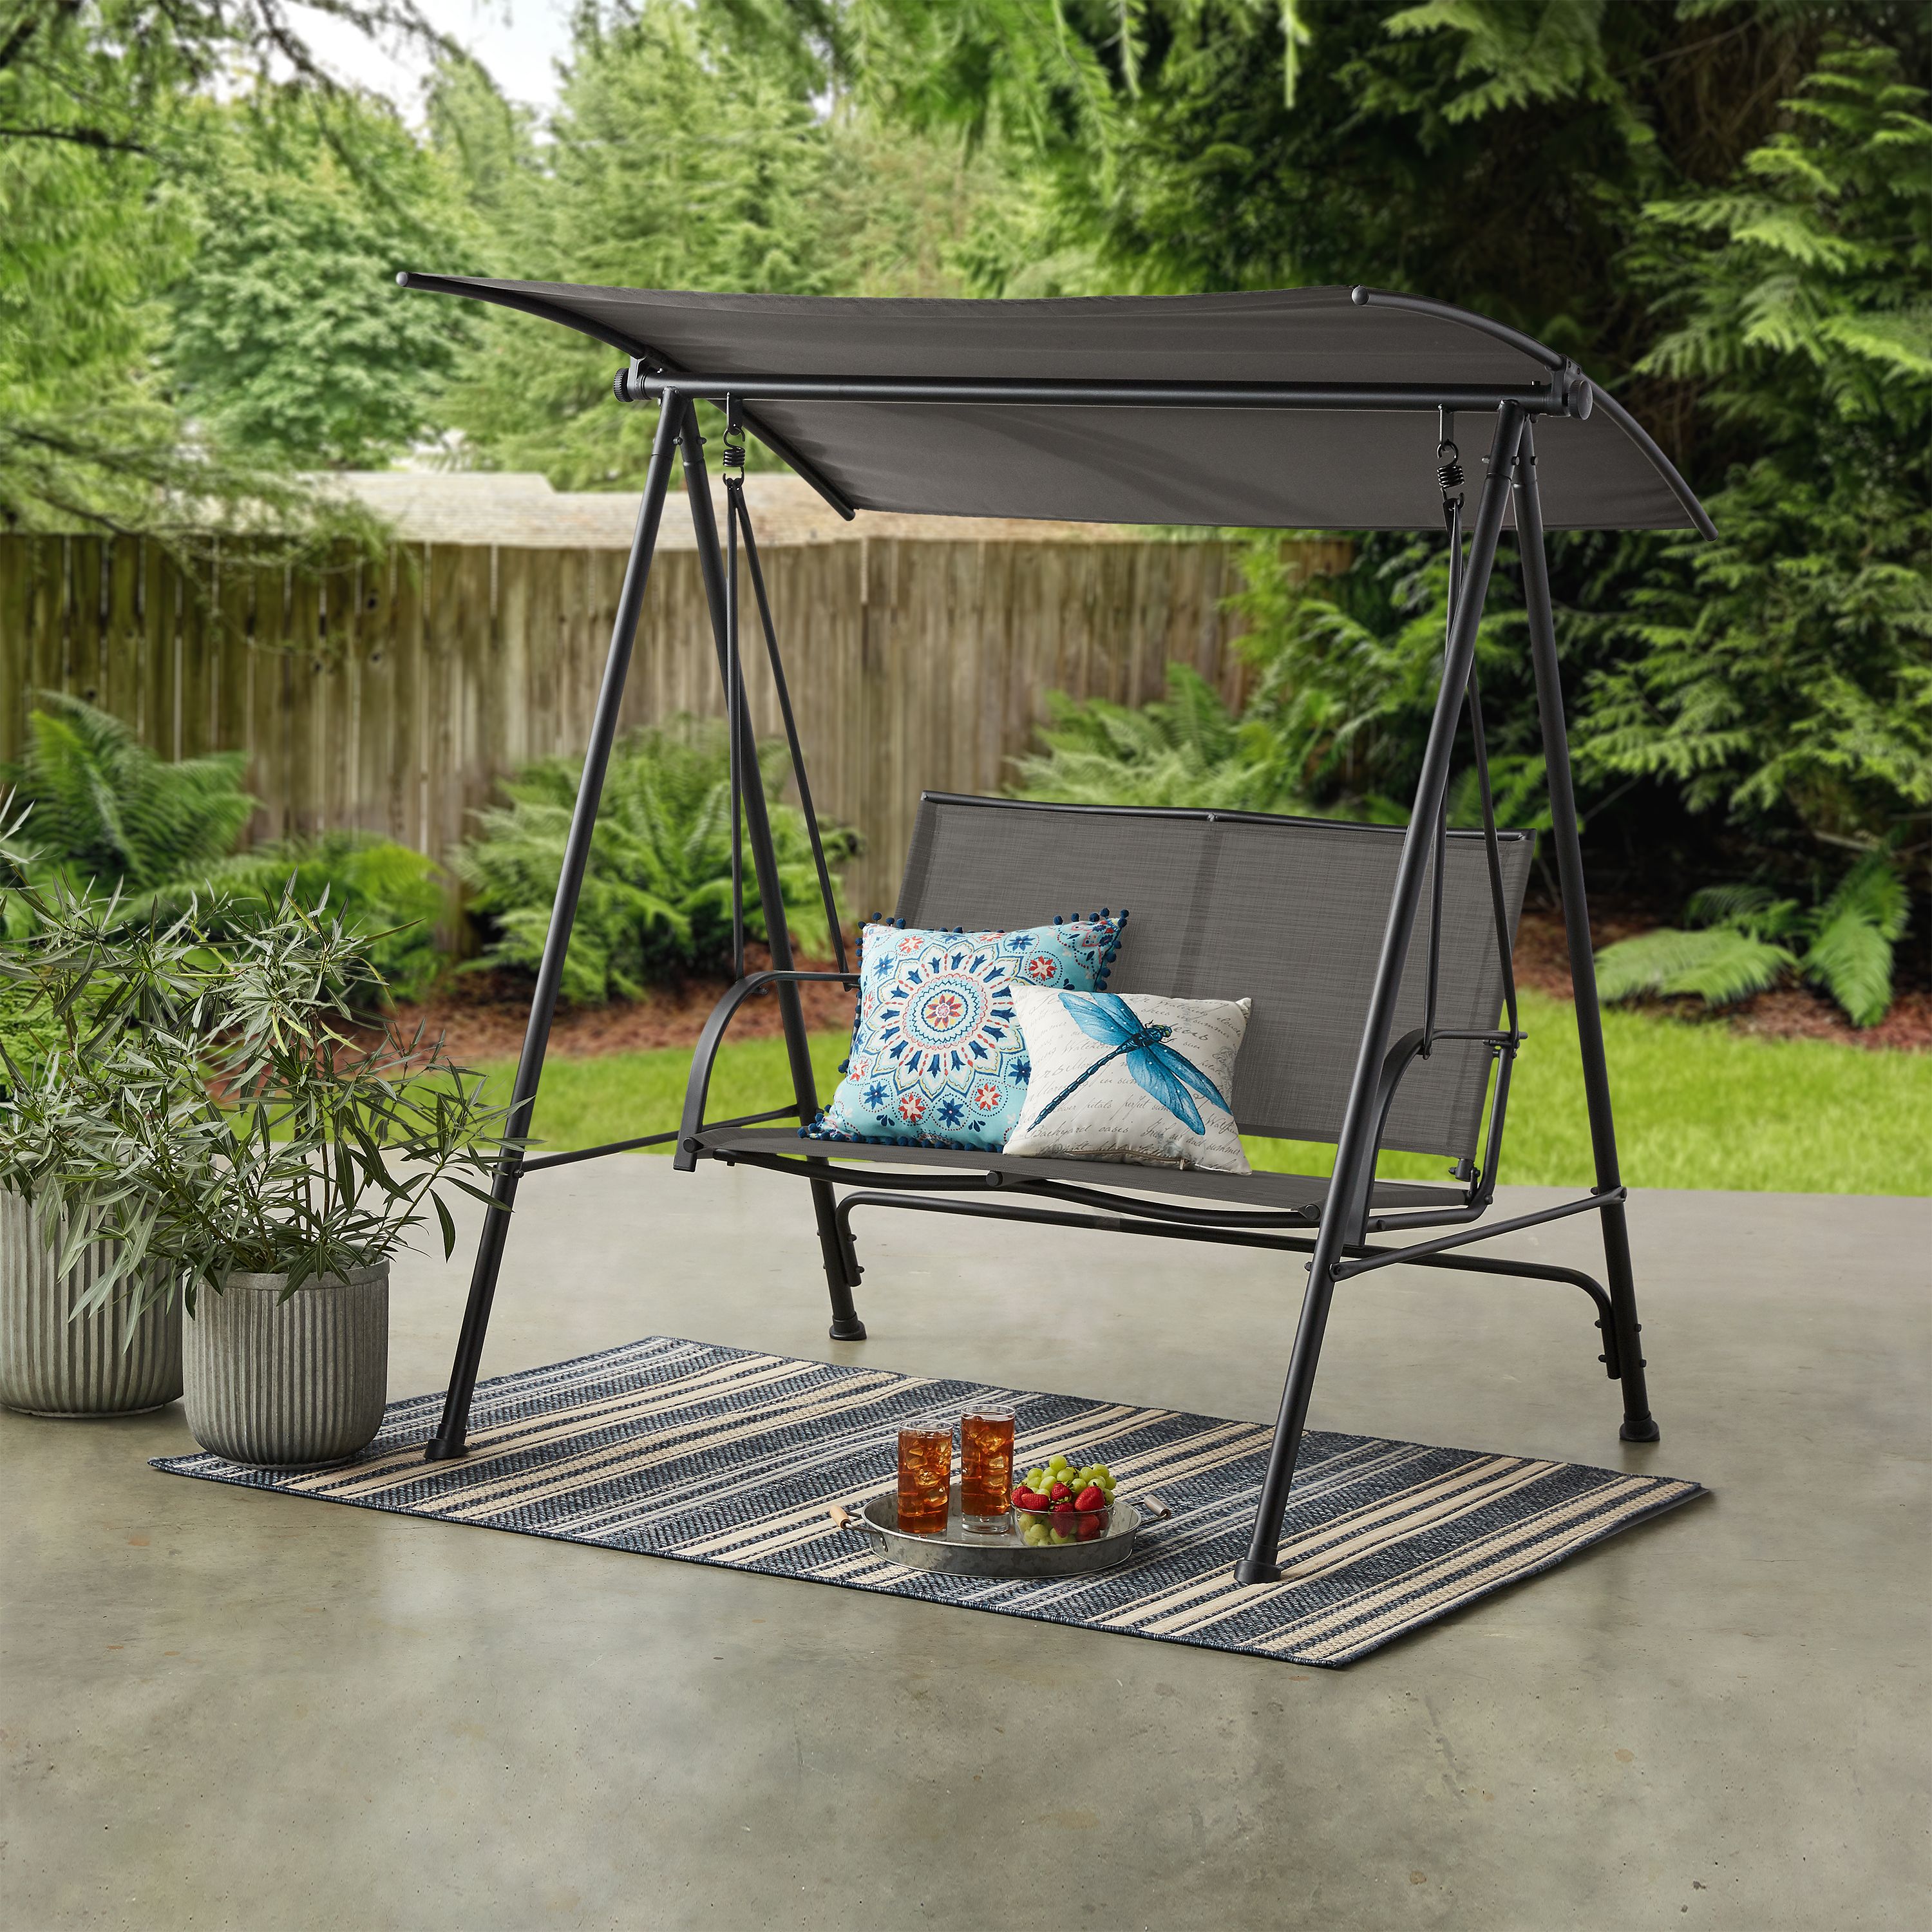 Mainstays Albany Lane 2-Seat Steel Canopy Porch Swing, Black/Gray - image 1 of 9